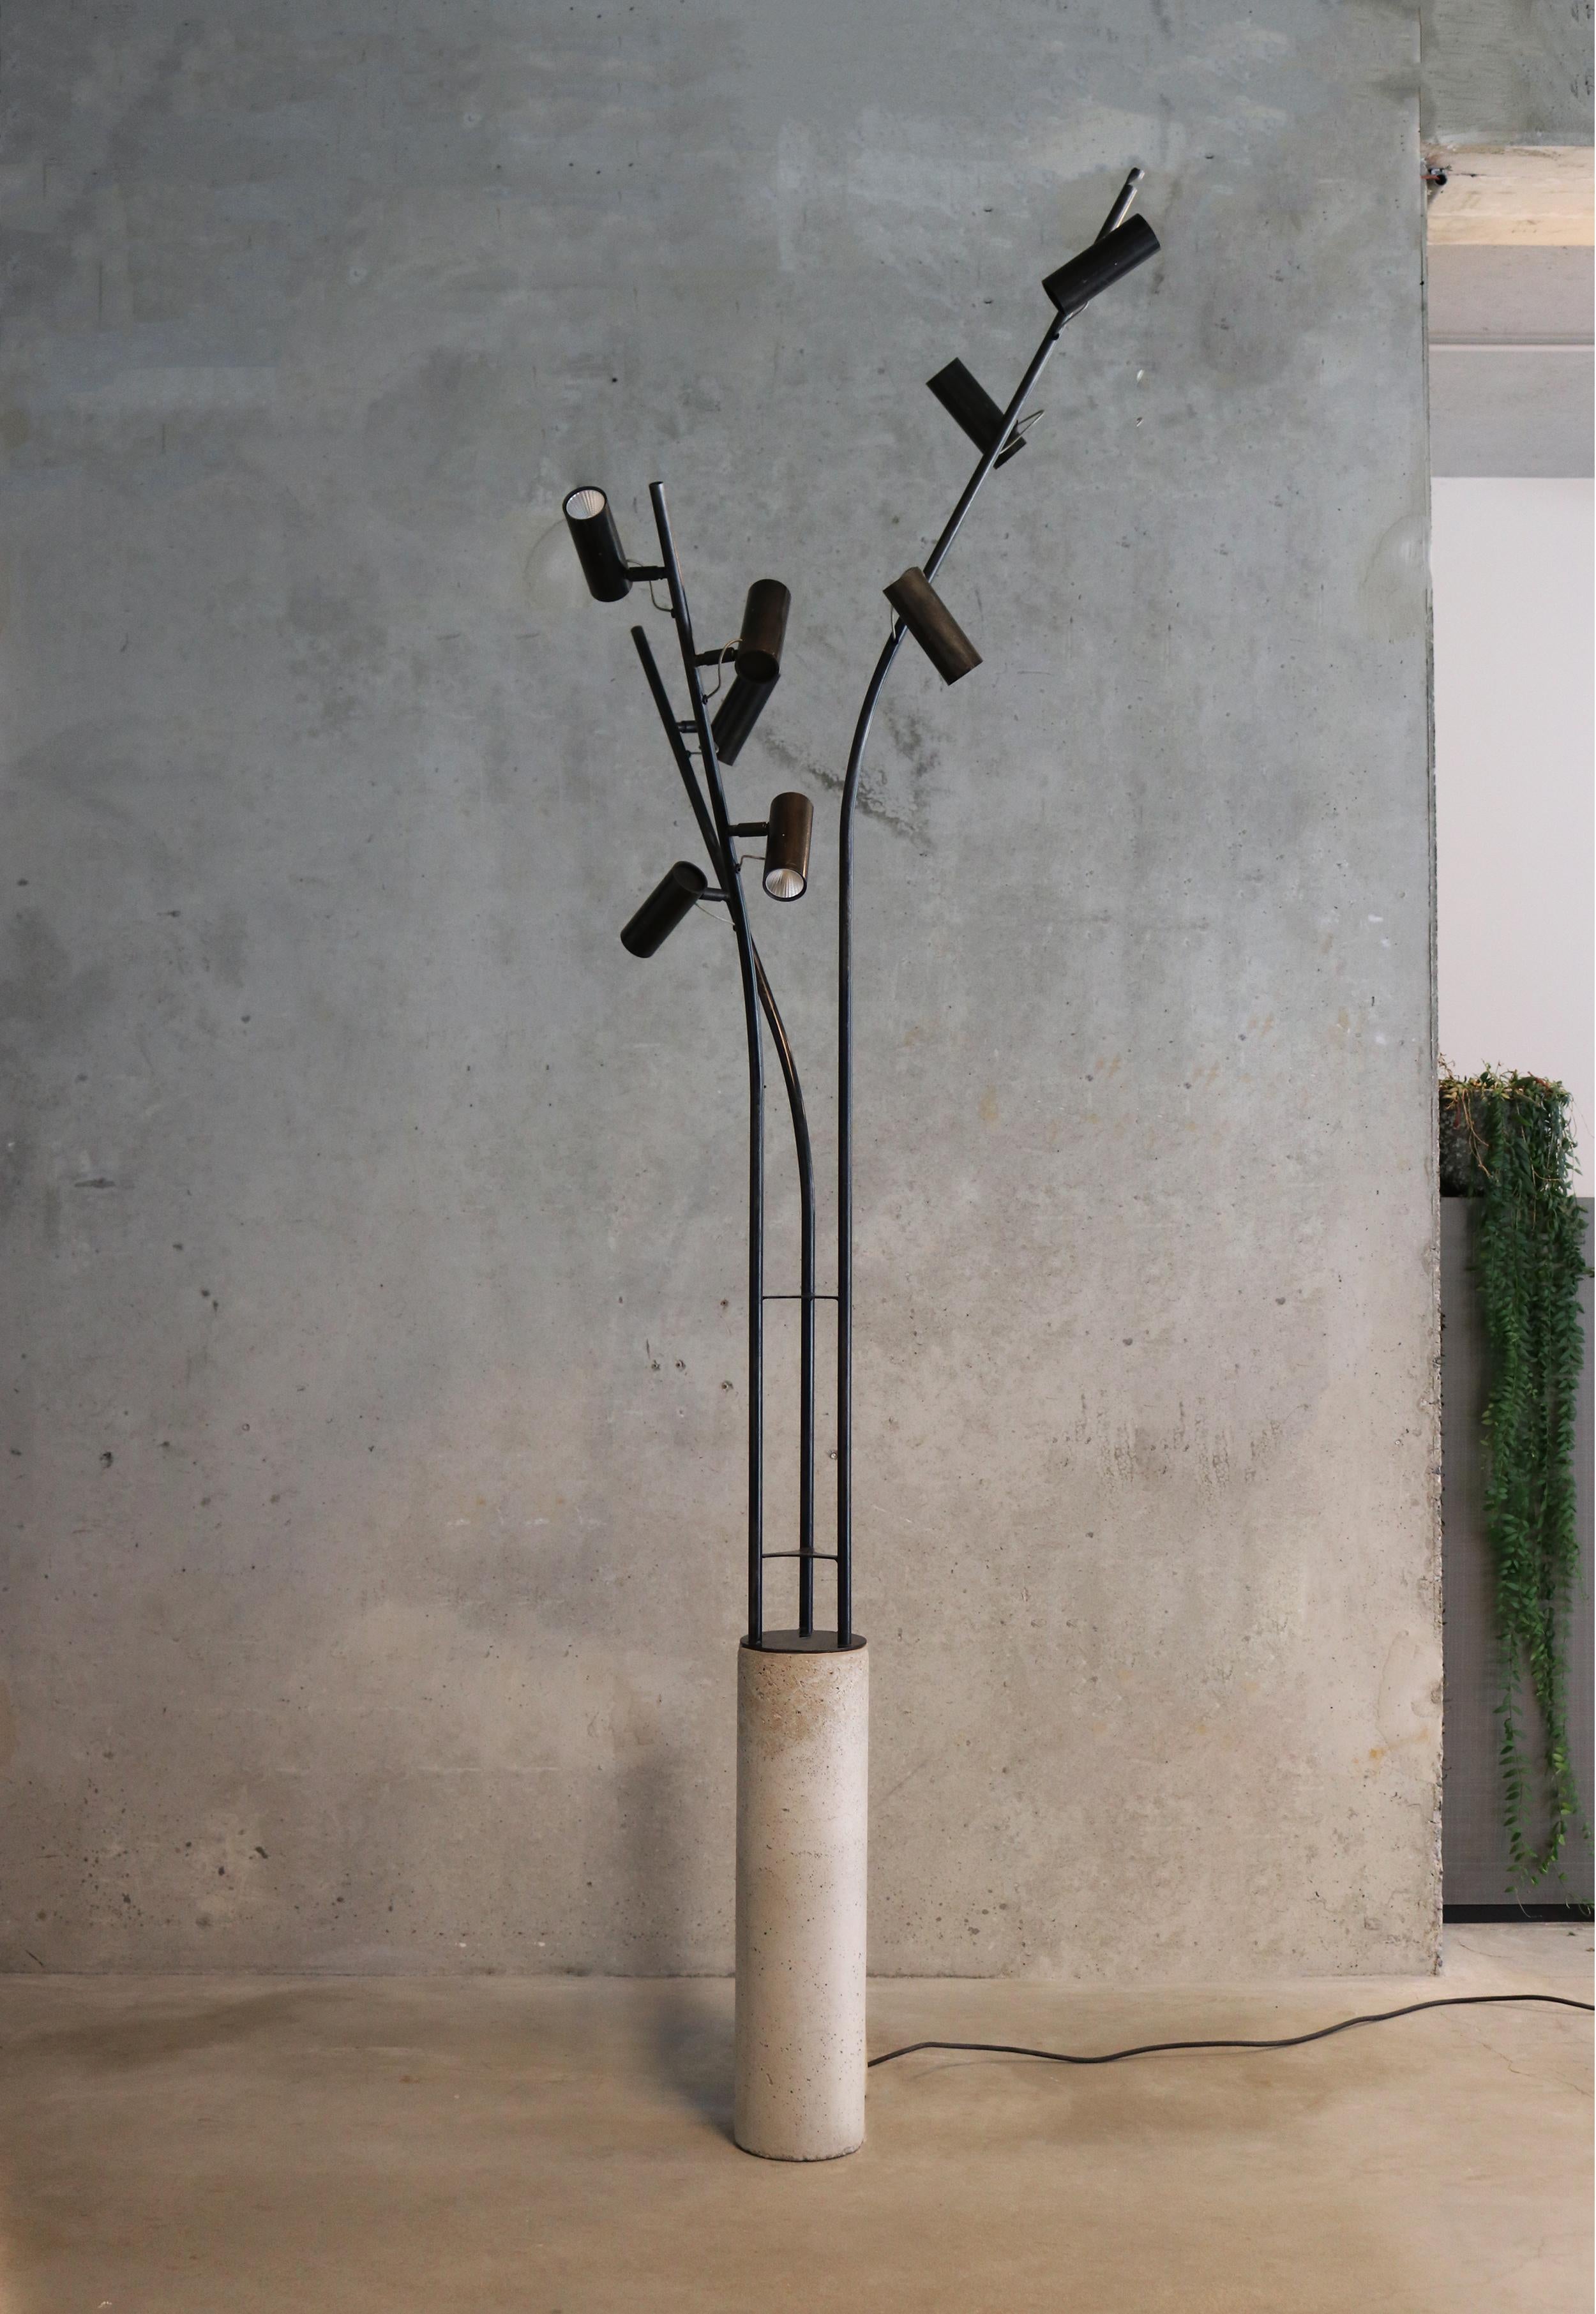 Design Lungoo

Concrete base / pedestal / dimensions 60cmheight, diameter 15cm
3 blanc steel or iron tubes chemically blackened / 180 length, 3 lamps – 135 length , 3 lamps – 135 length, 2 lamps

Total 8 dimmable, directional spotlights, 2 circuits,